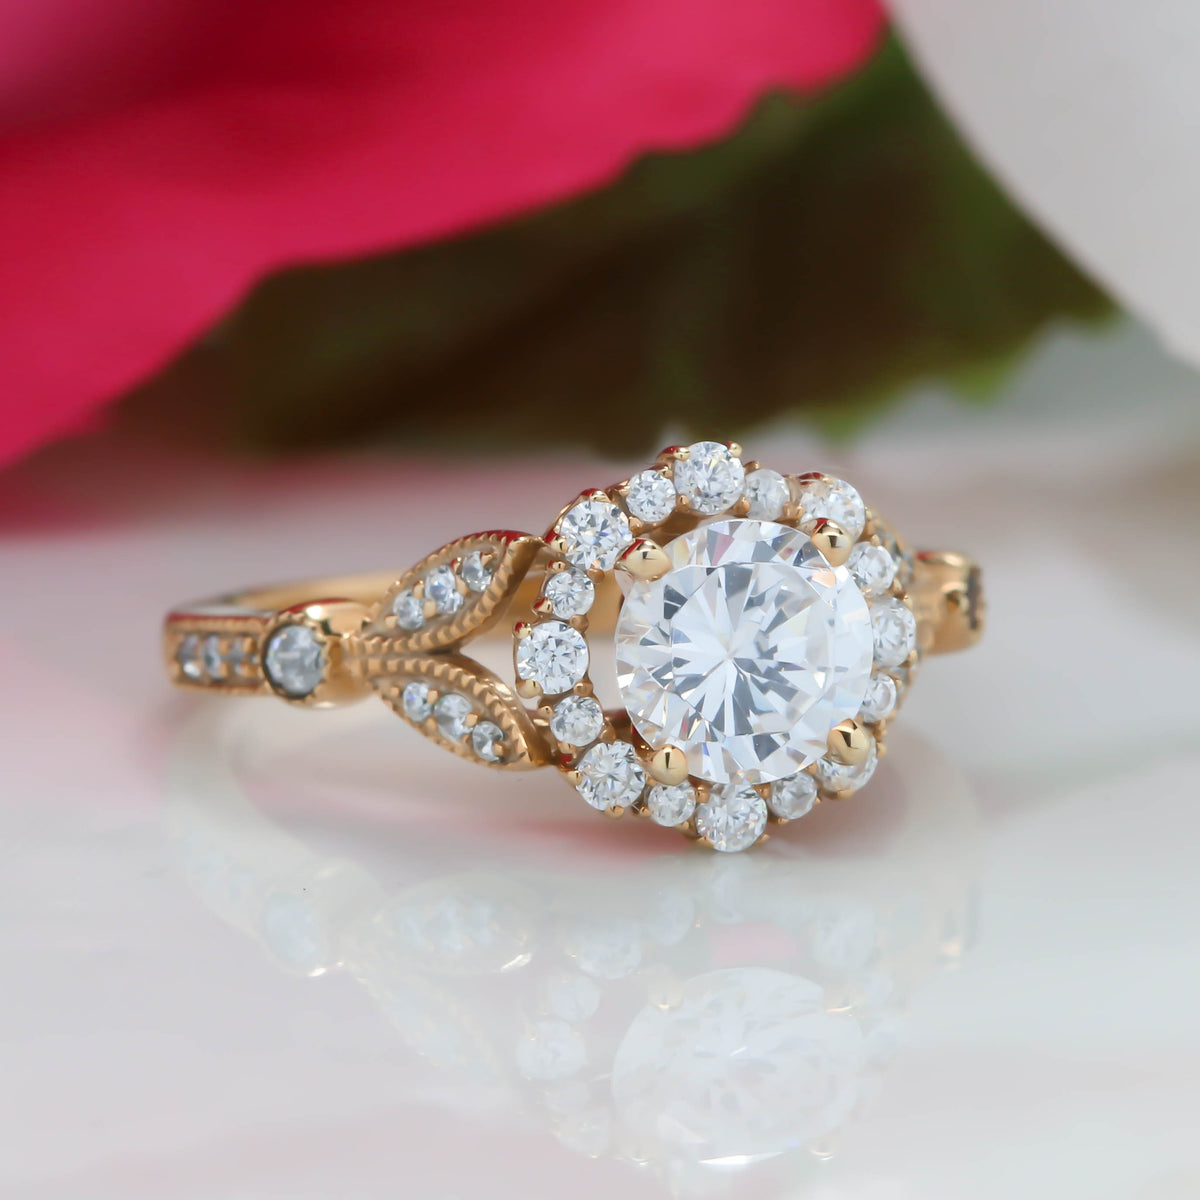 Vintage Floral Style Halo Diamond and Moissanite Engagement Ring - Lilly - Moissanite Rings